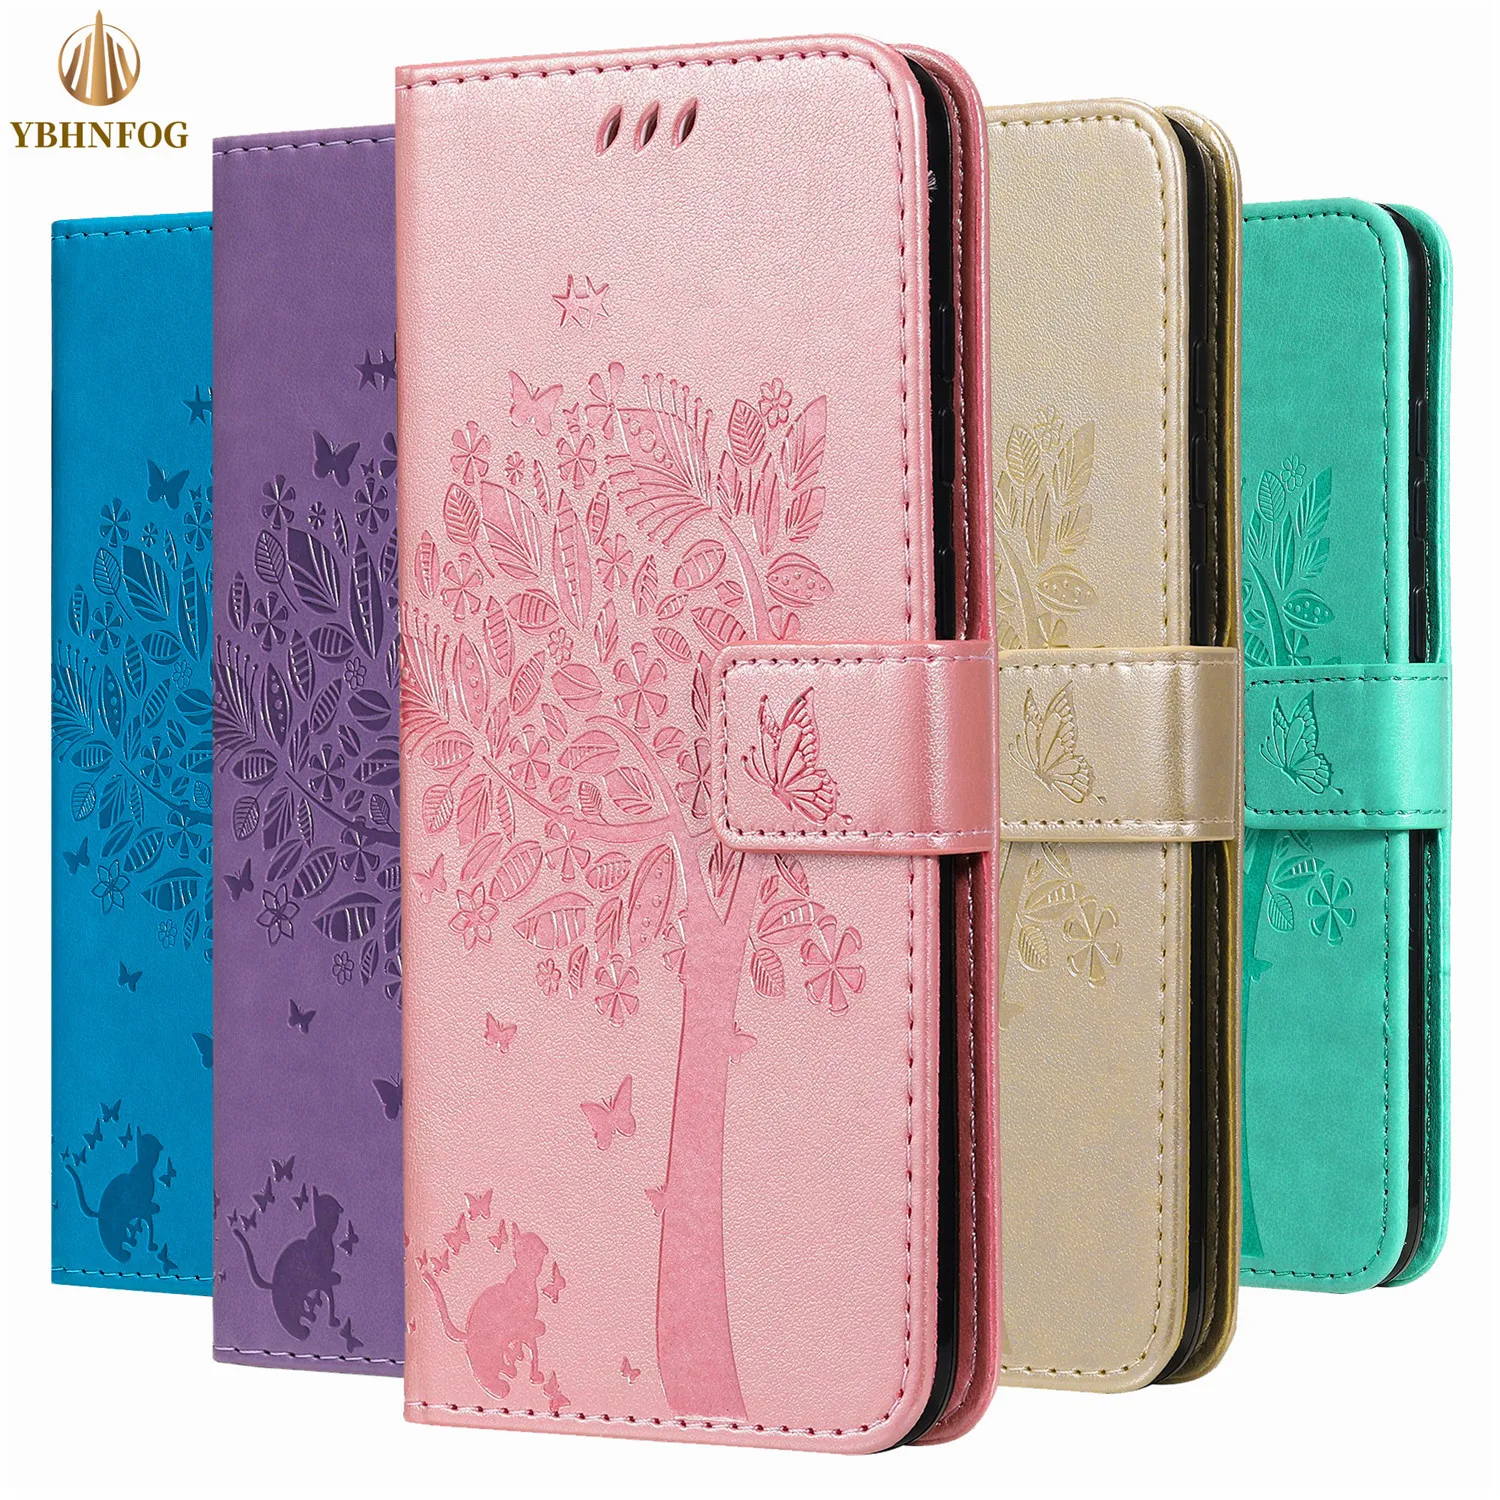 

A3 A5 A6 A7 A8 A9 J4 J6 Plus 2018 Embossing Leather Flip Cover For Samsung Galaxy J1 2016 J3 J5 J7 2017 Holder Wallet Stand Case